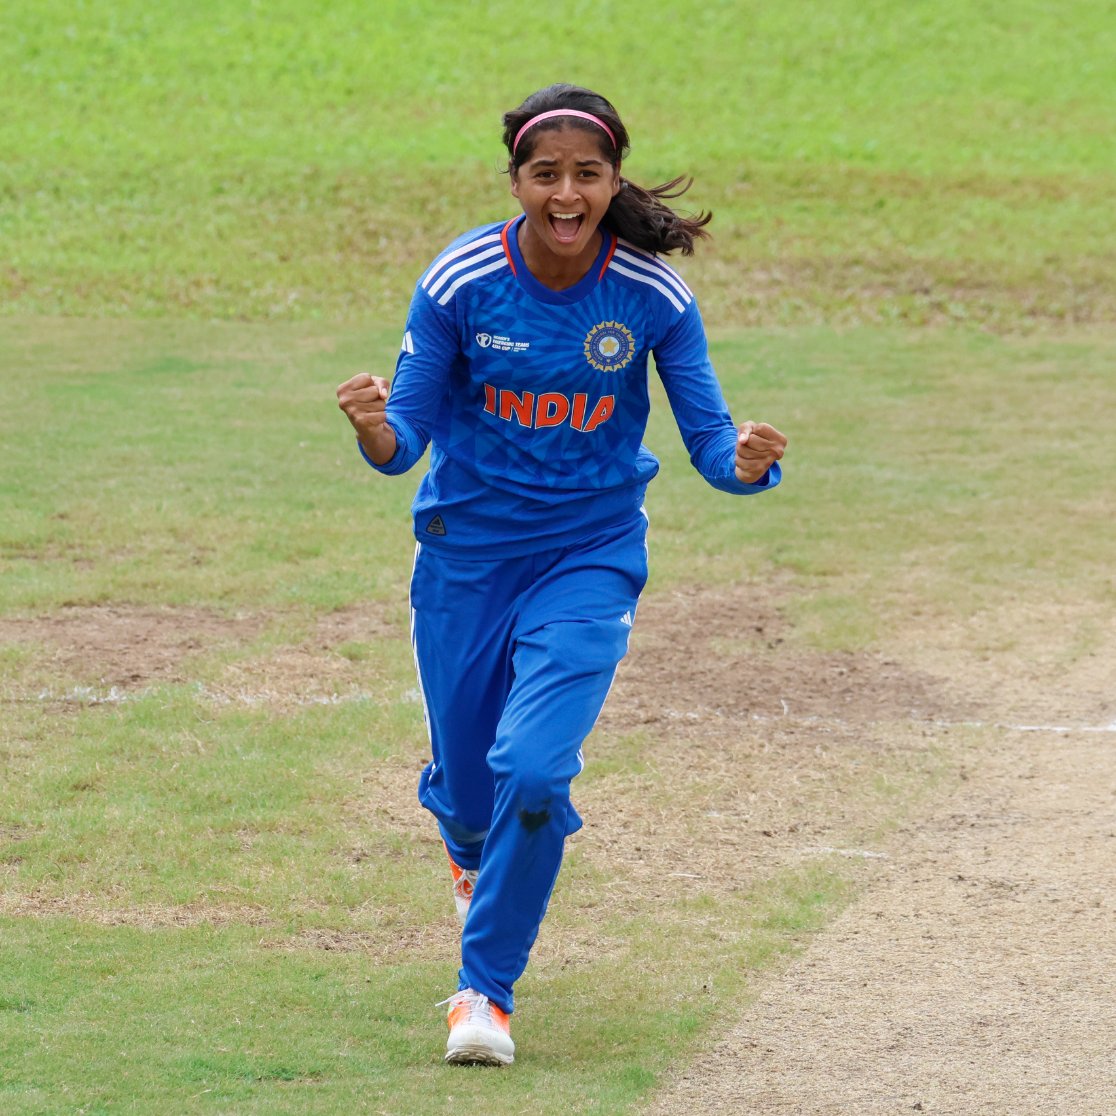 WCPL 2023: [WATCH] Talented Indian Spinner Bowls a Beauty To Dismiss Samara Ramnath